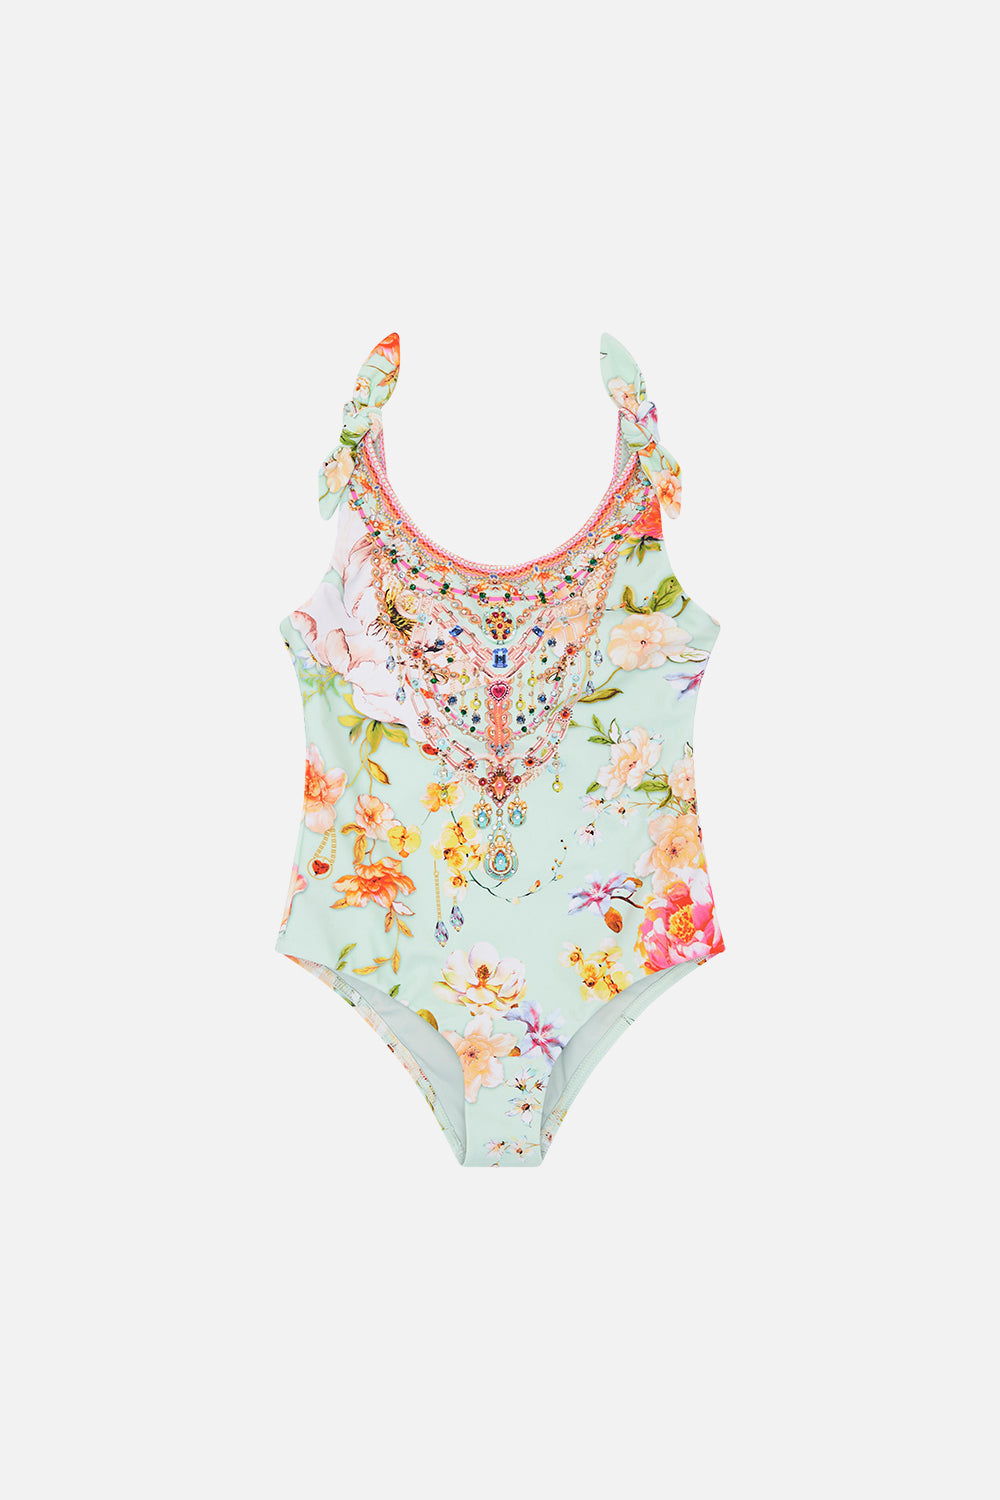 Product view of MILLA BY CAMILLA kids one piece swimsuit in Talk The Walk print